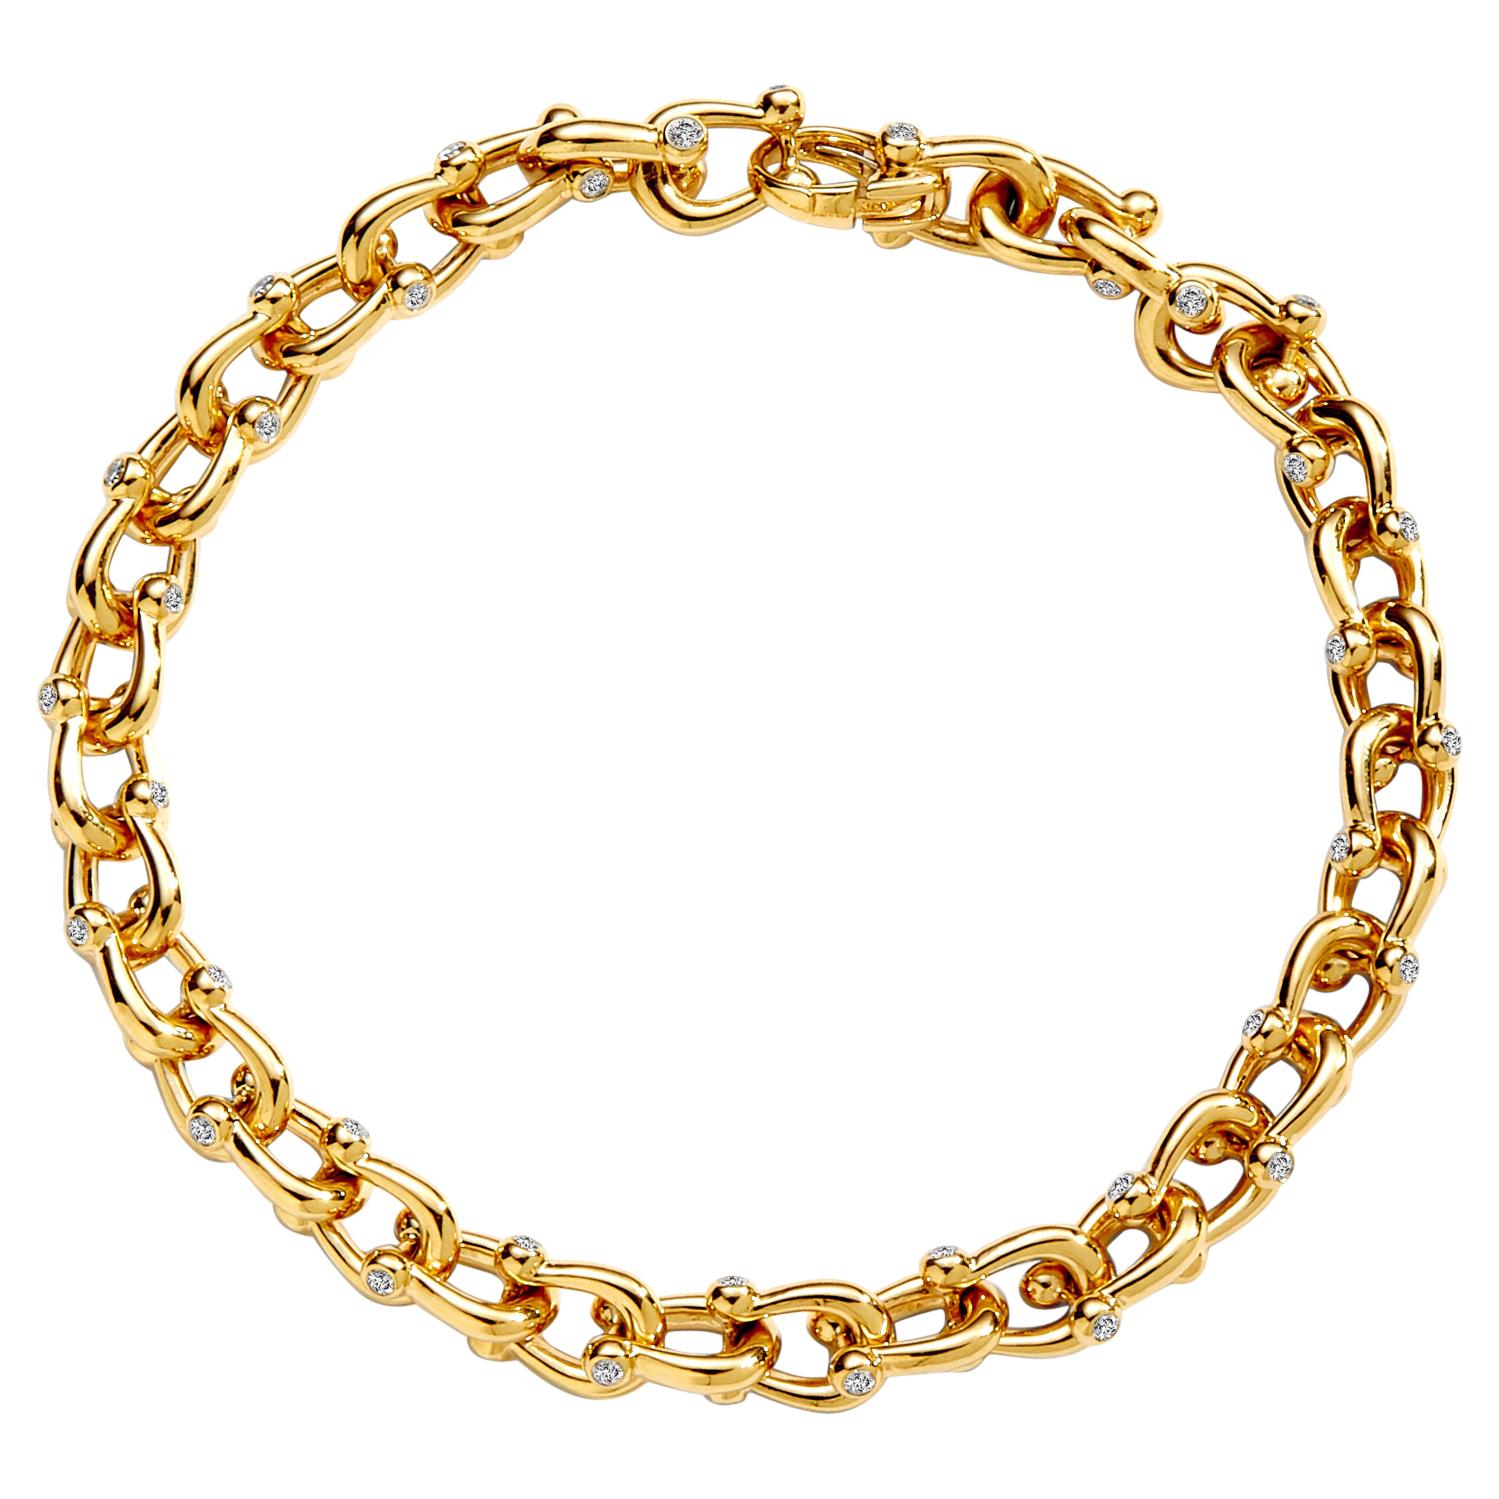 Syna Yellow Gold Horse Shoe Bracelet with Diamonds